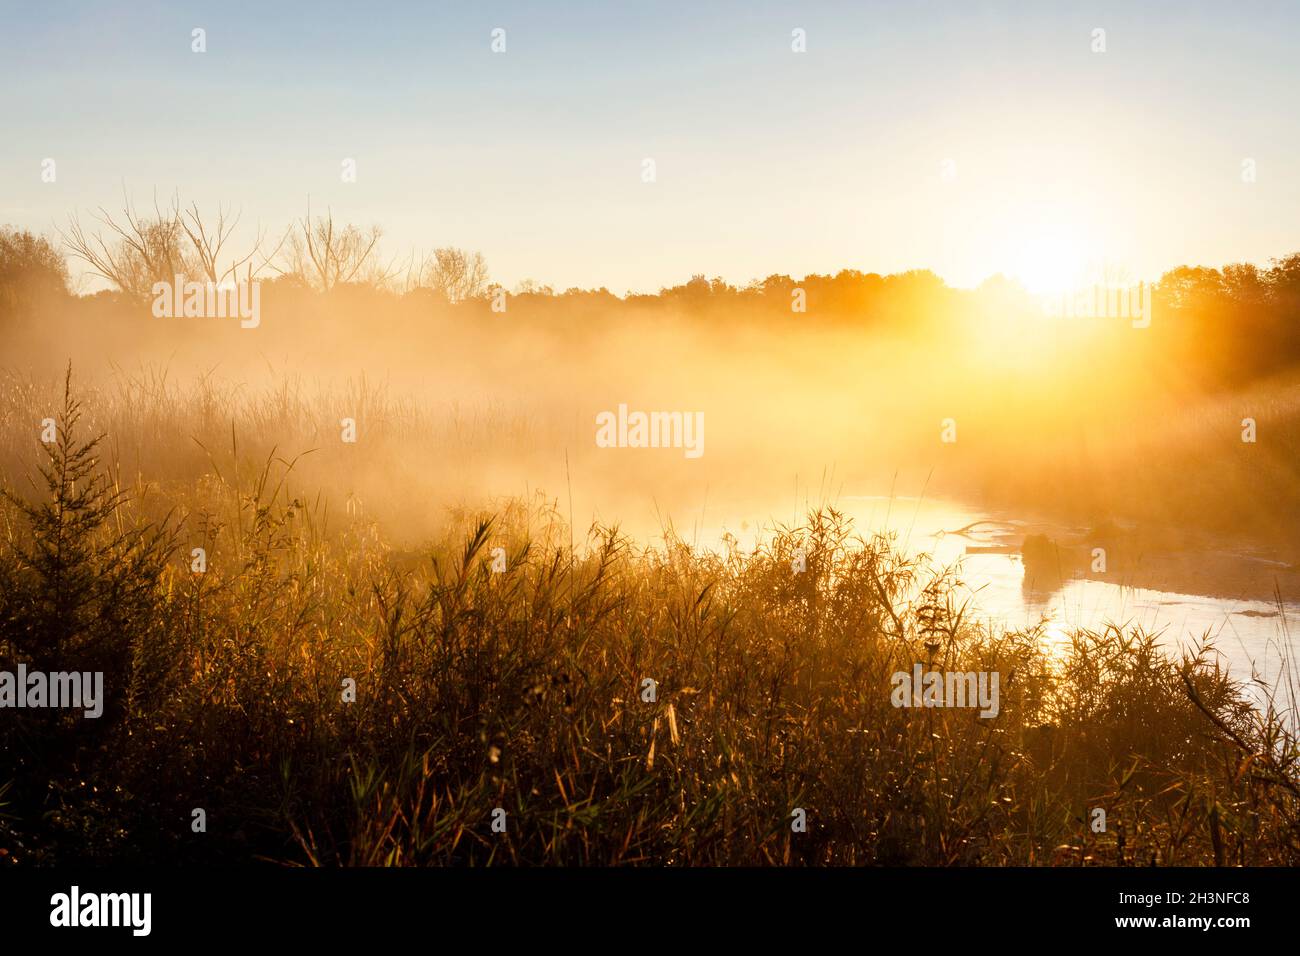 The sun peaks over the distant tree line as steam and fog collect in the marshy river basin in Waukesha County, Wisconsin on an autumn morning. Stock Photo